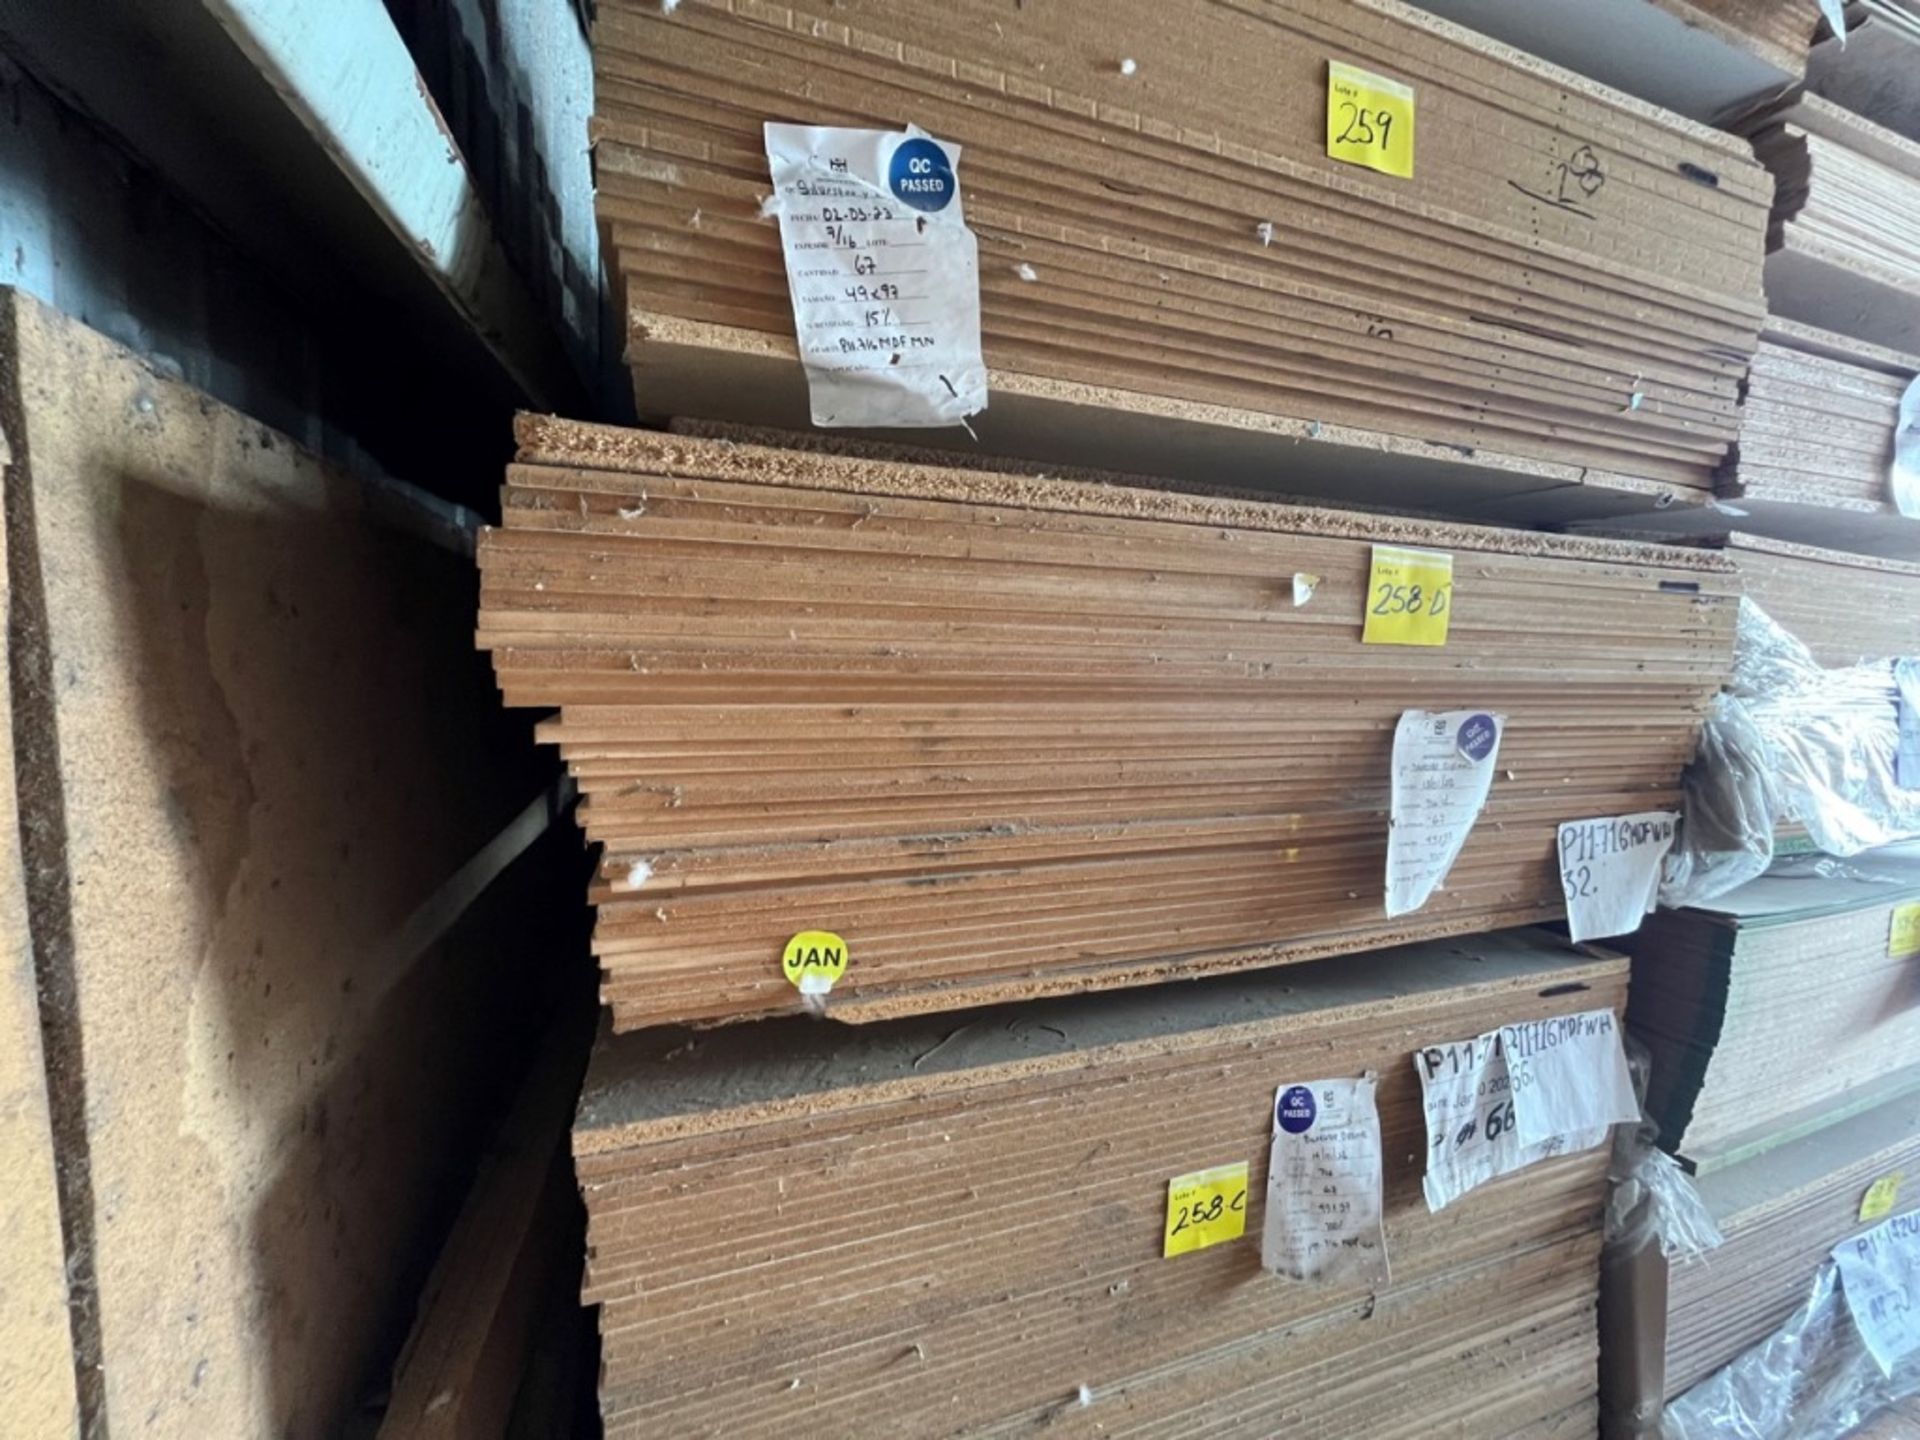 (NEW) Lot of 32 pieces of wood in 7/16 MDFWH material measuring 4 x 8 ft. / (NUEVO) Lote de 32 piez - Image 3 of 5